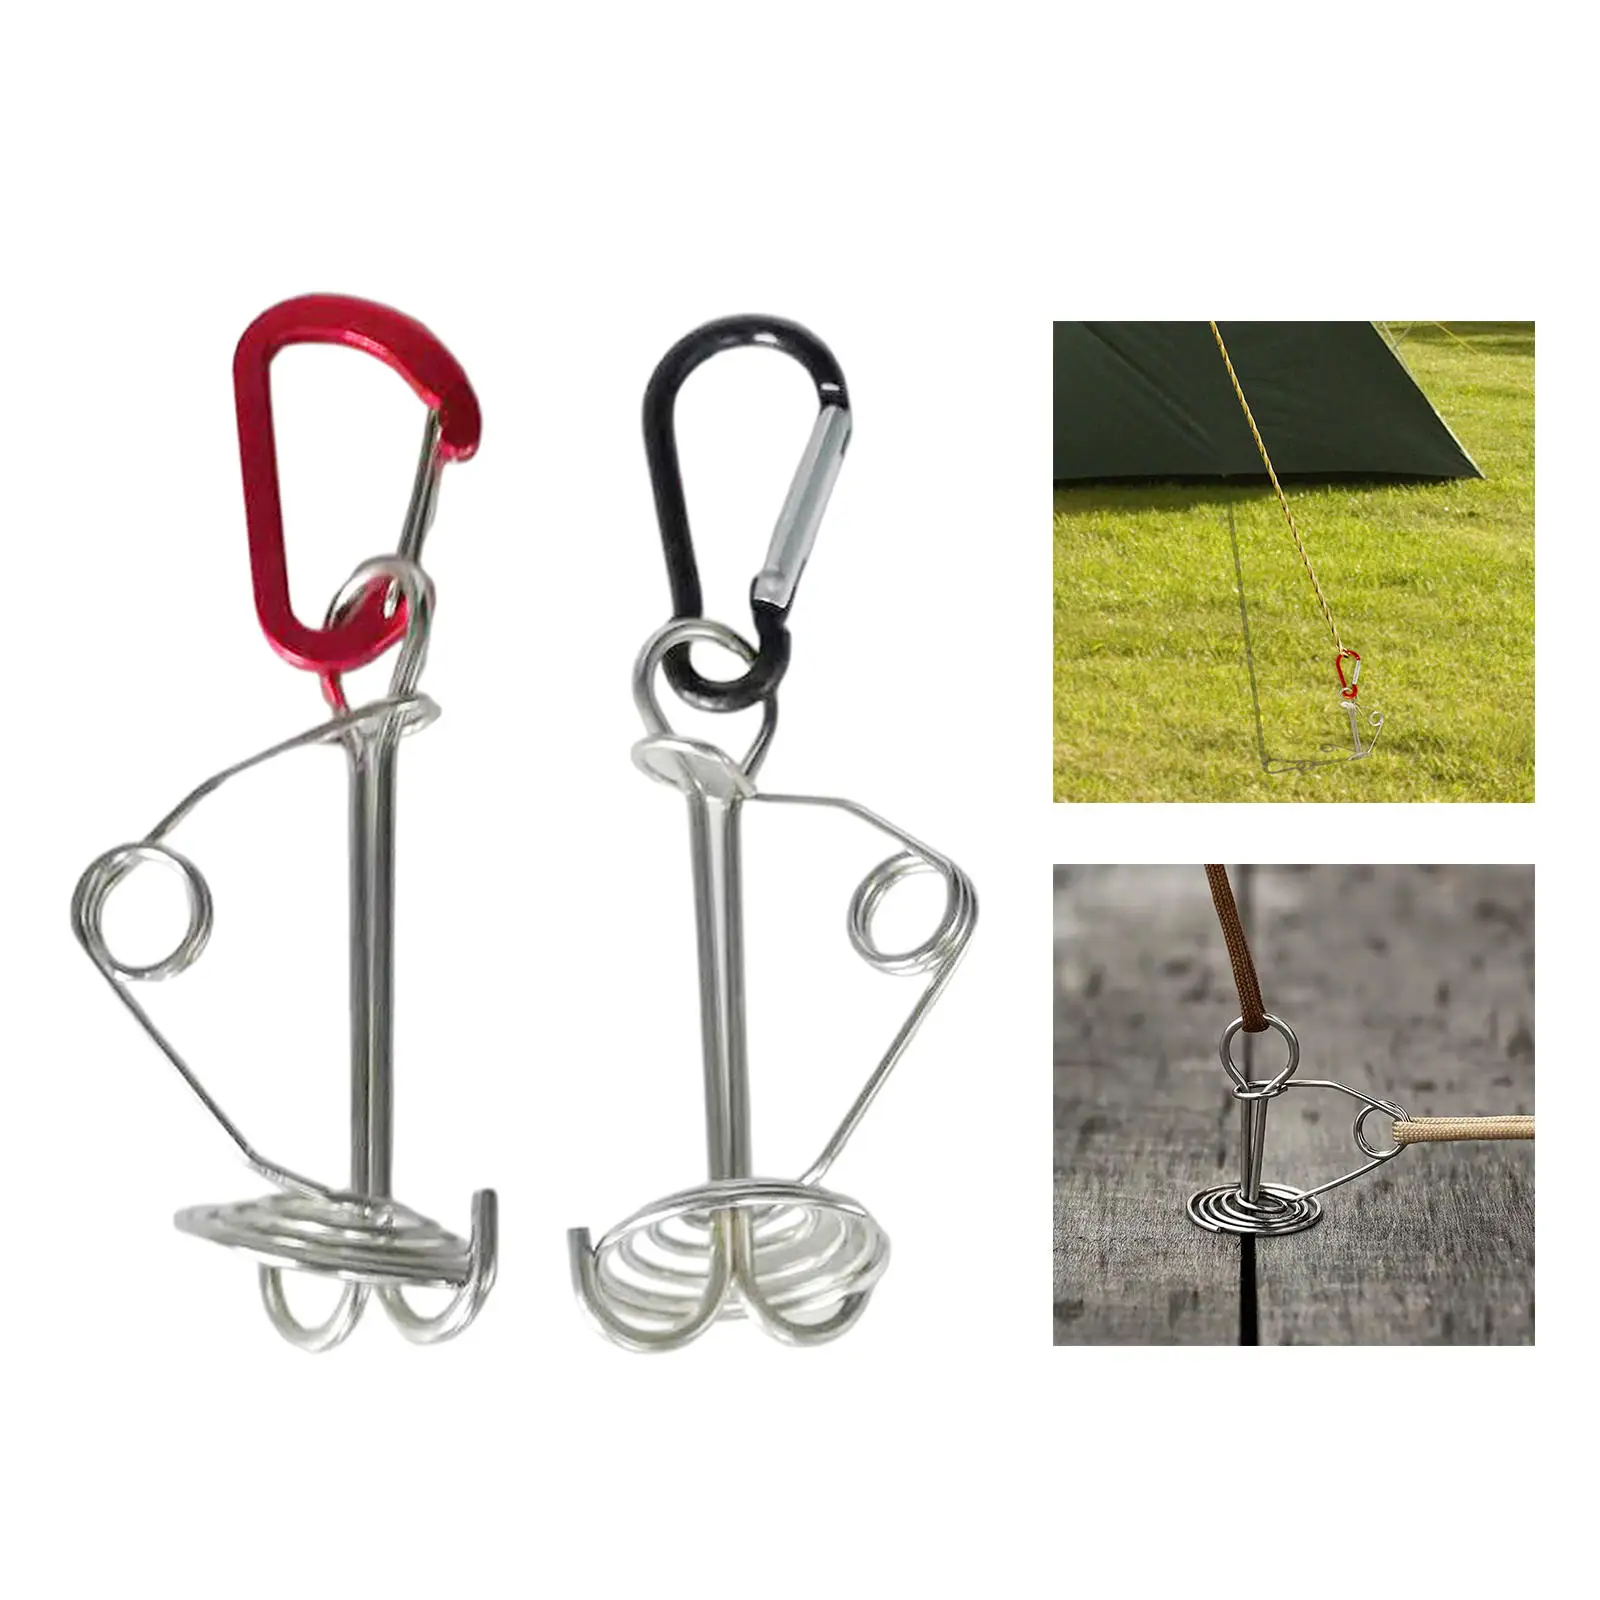 10x Spiral Tent Stakes with Spring Buckle Anti-Tripping Awning Octopus Portable Deck Anchor Peg Board Peg for Gallery Hiking